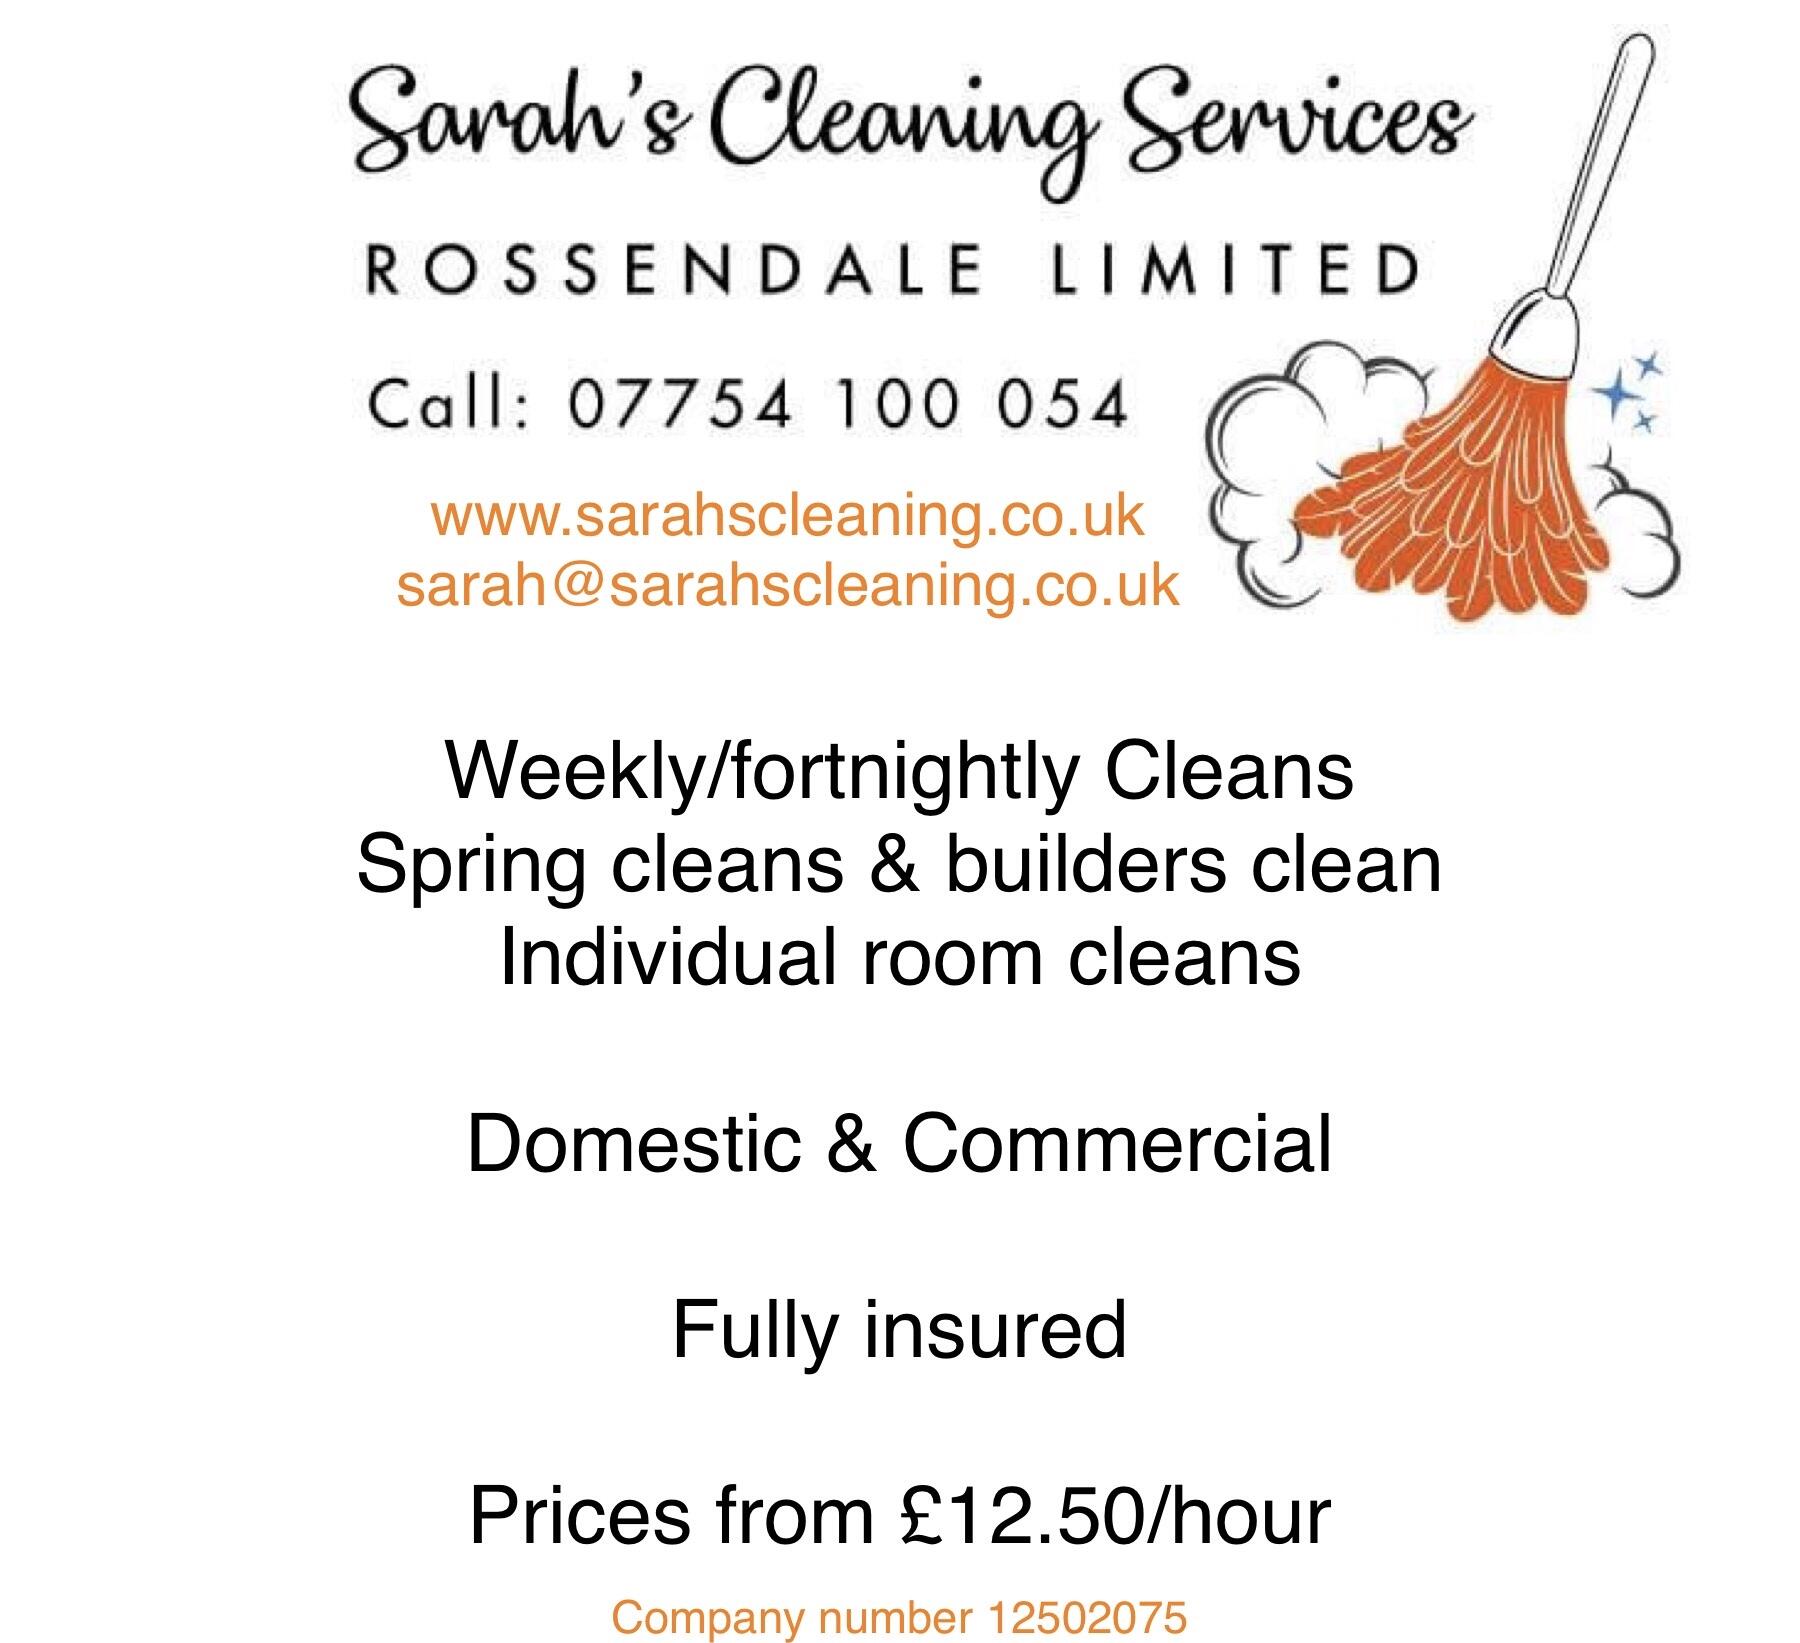 Sarah’s Cleaning Services Rossendale Limited - Rossendale - Nextdoor